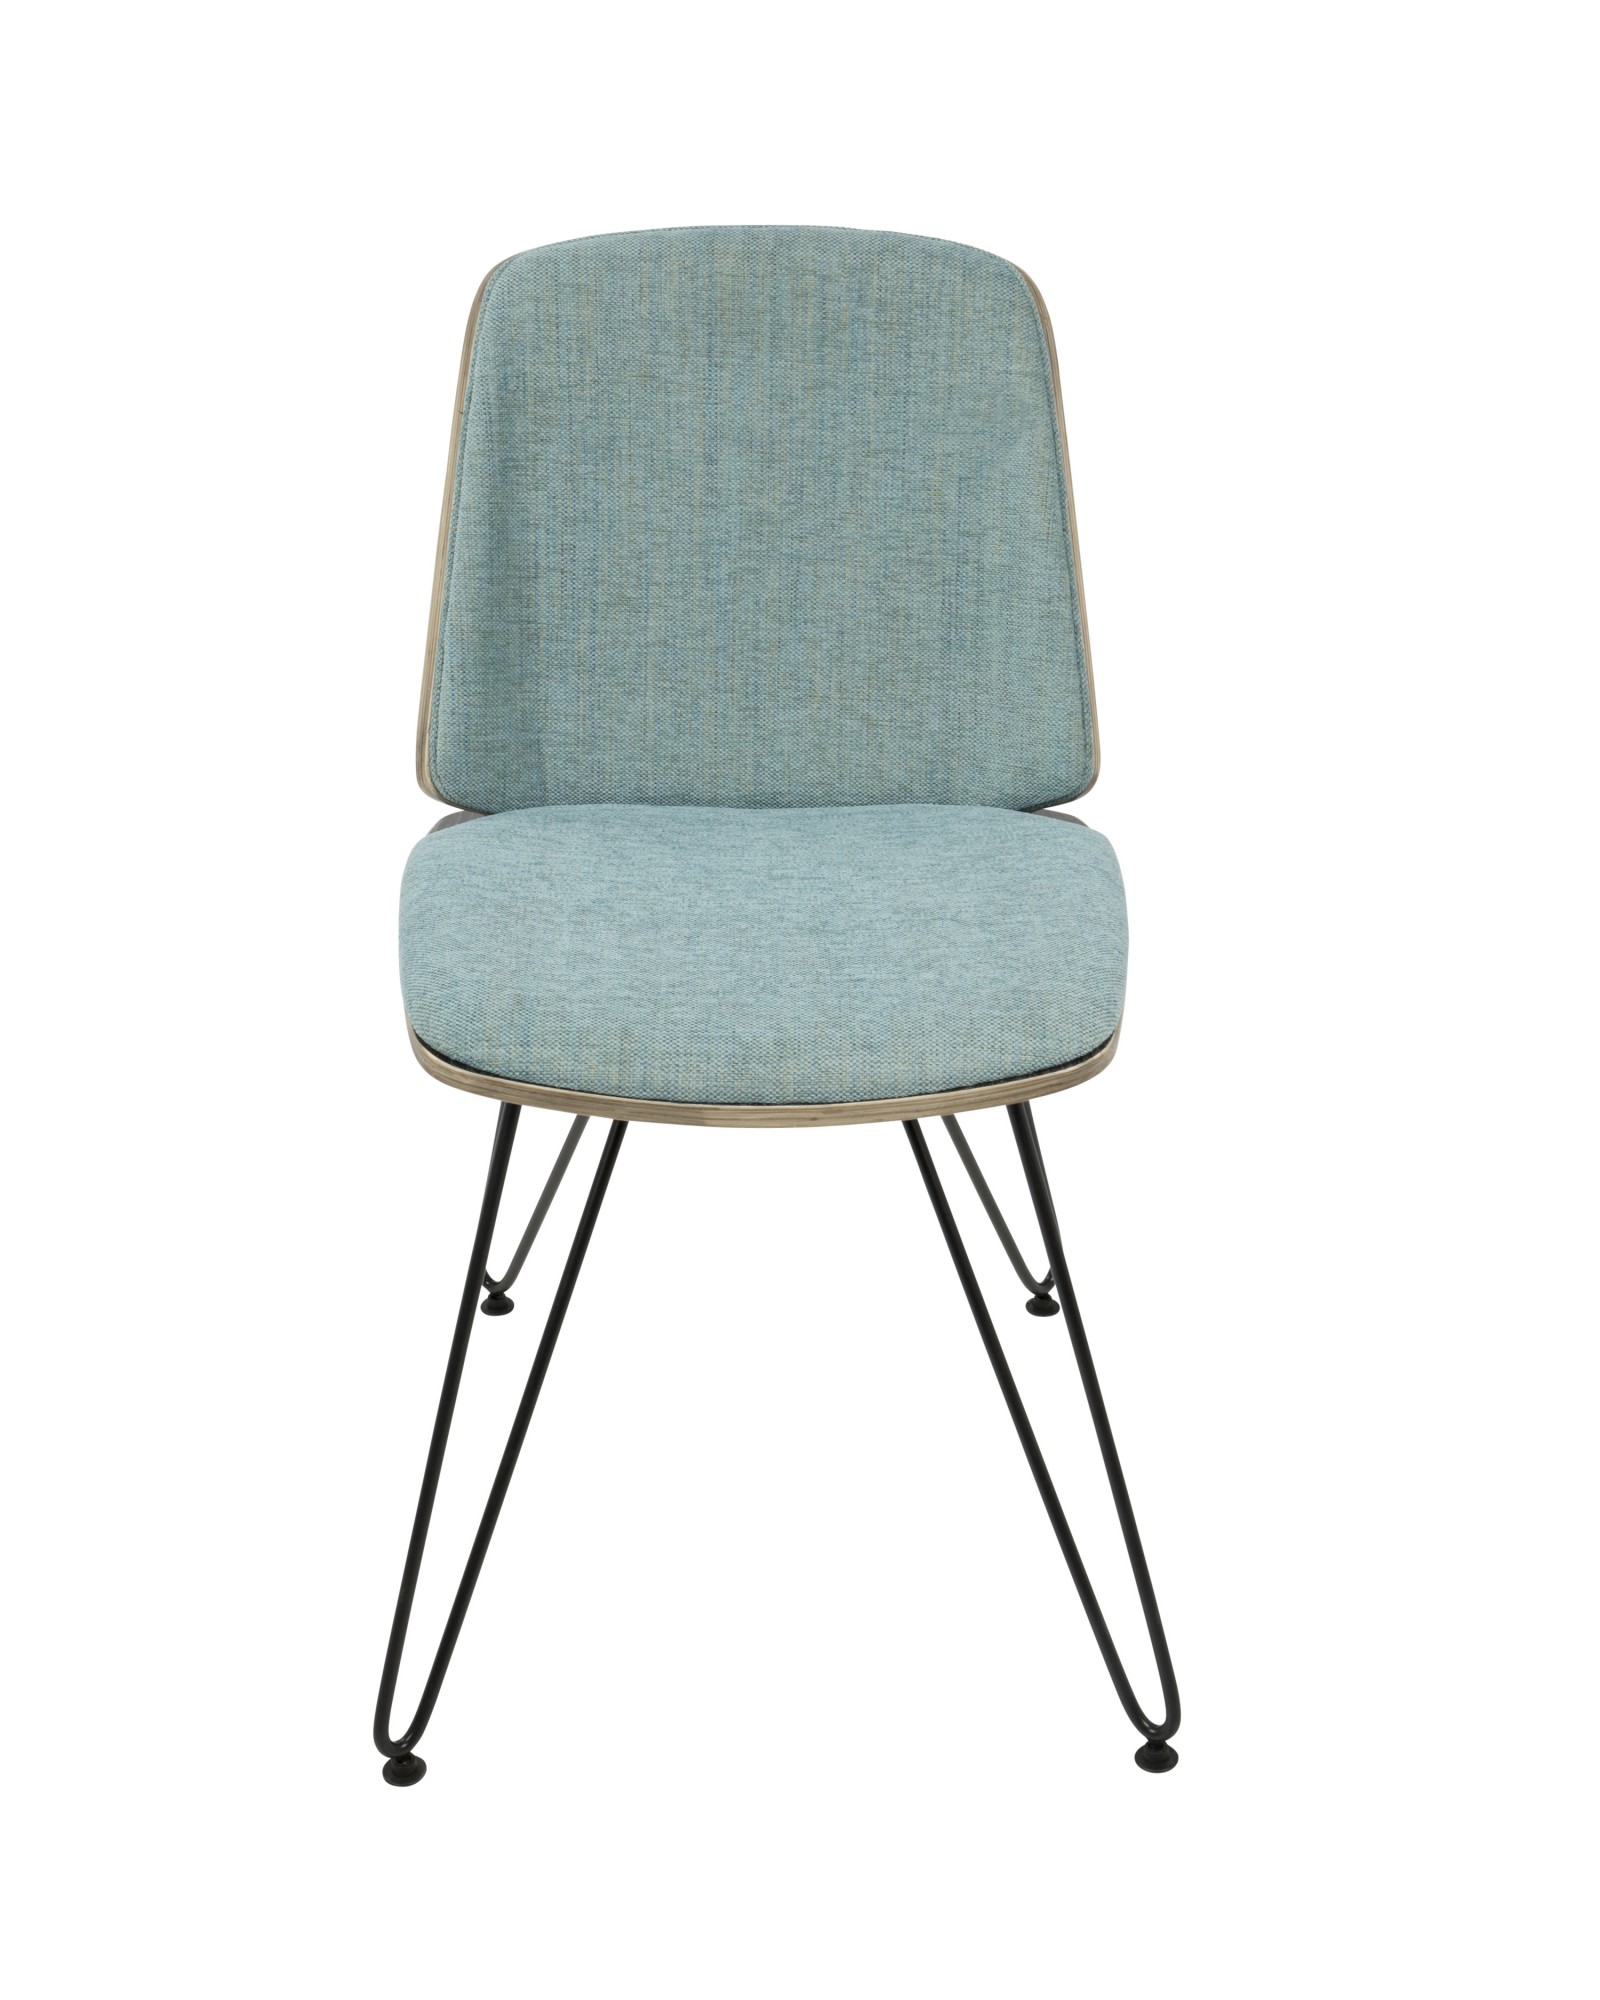 Avery Mid-Century Modern Dining/Accent Chair in Dark Grey Wood and Teal Fabric - Set of 2